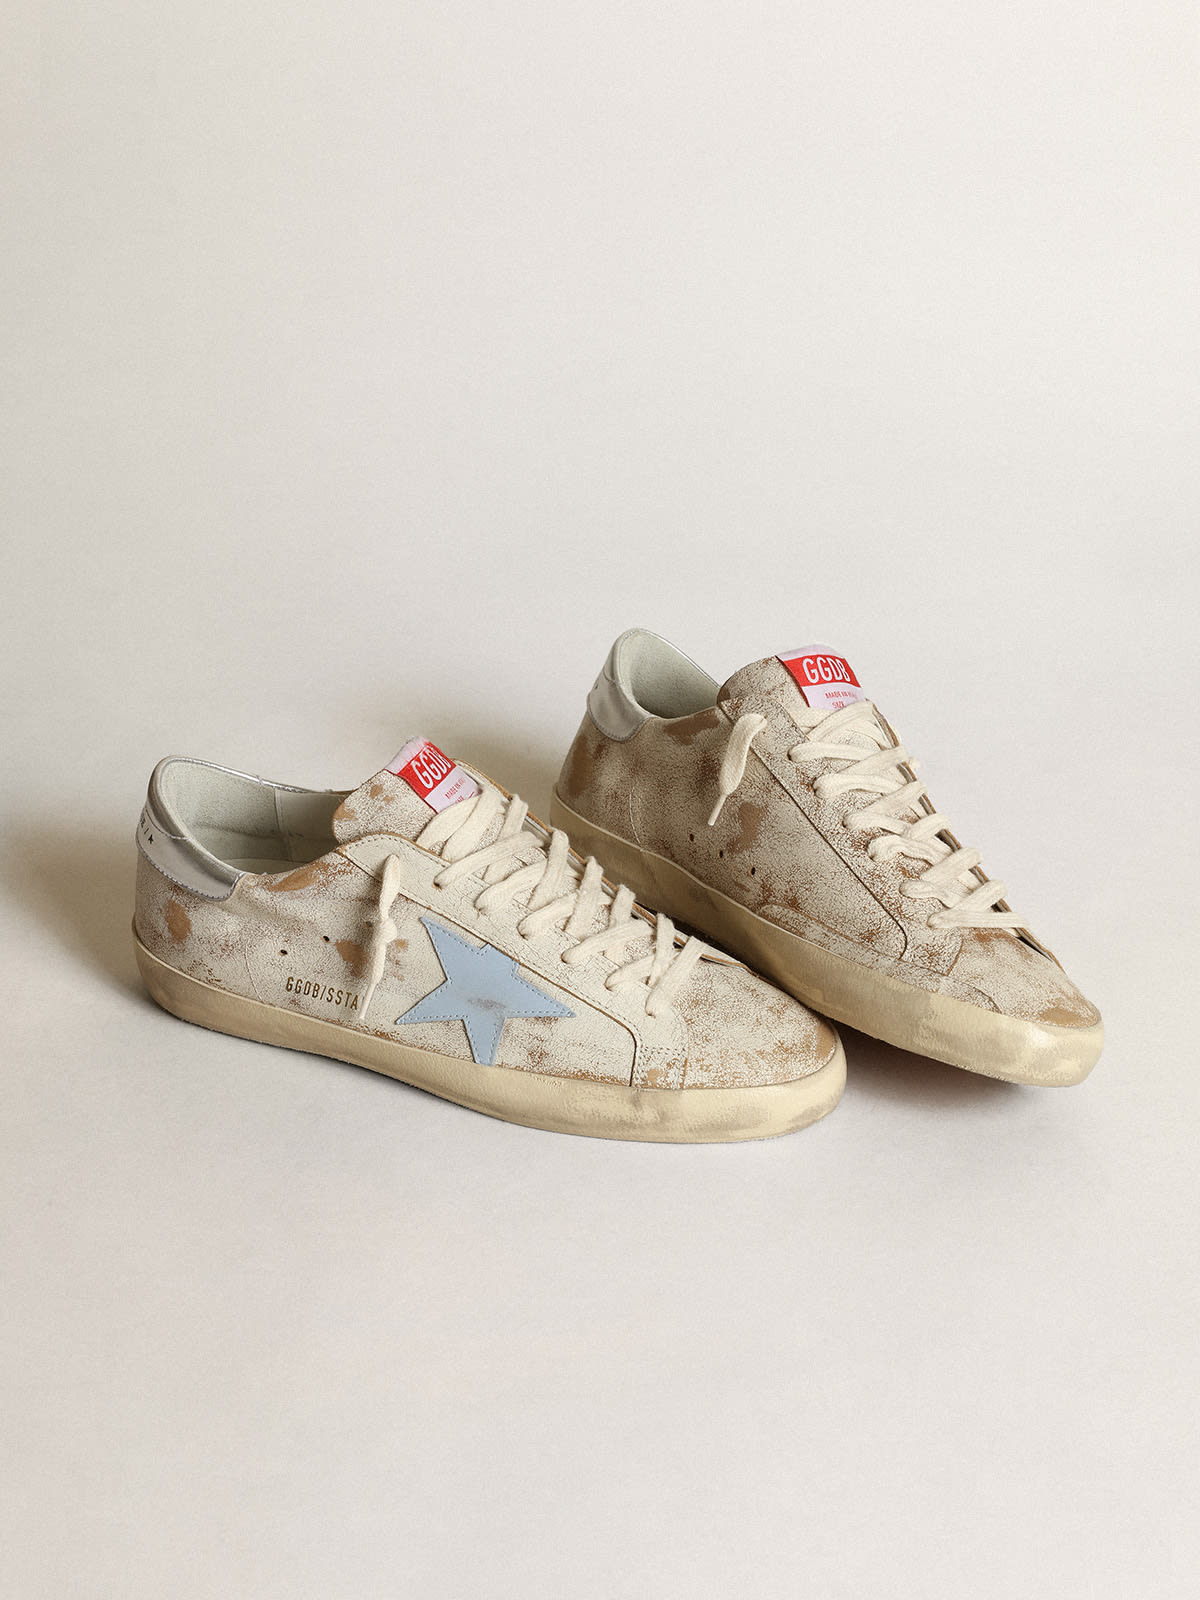 Golden Goose - Men's Super-Star with star in smoky light blue leather and silver heel in 